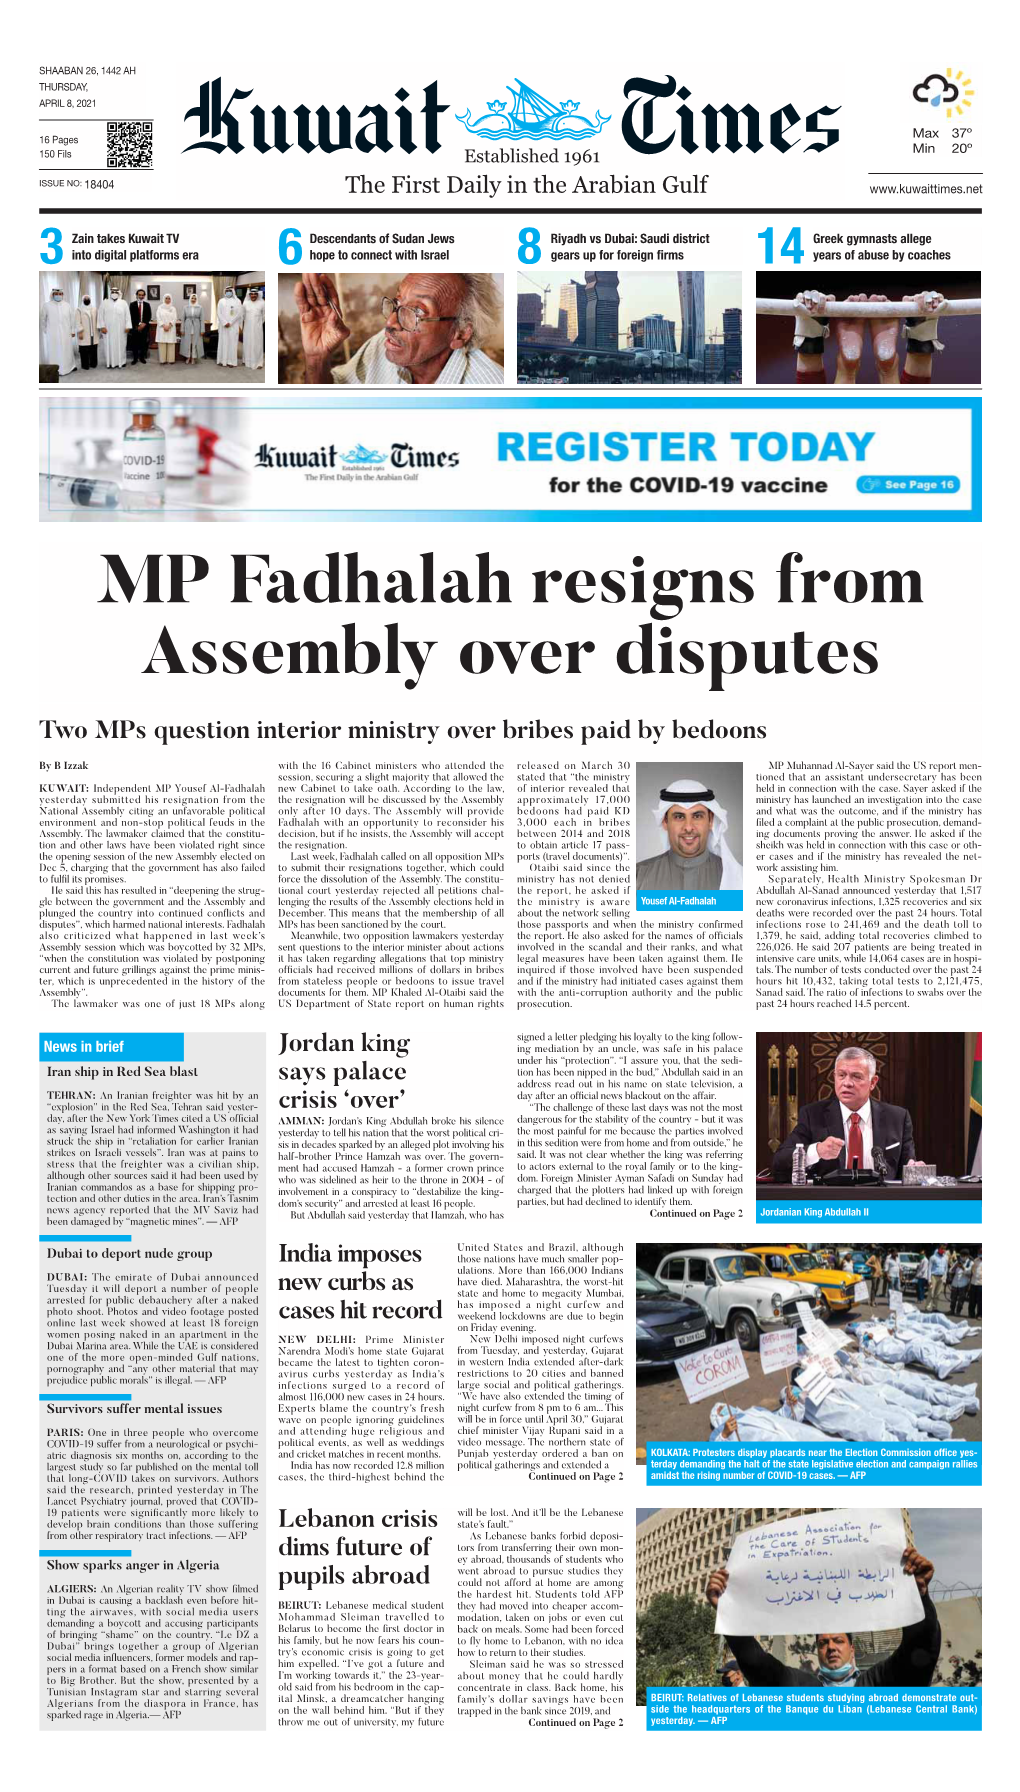 MP Fadhalah Resigns from Assembly Over Disputes